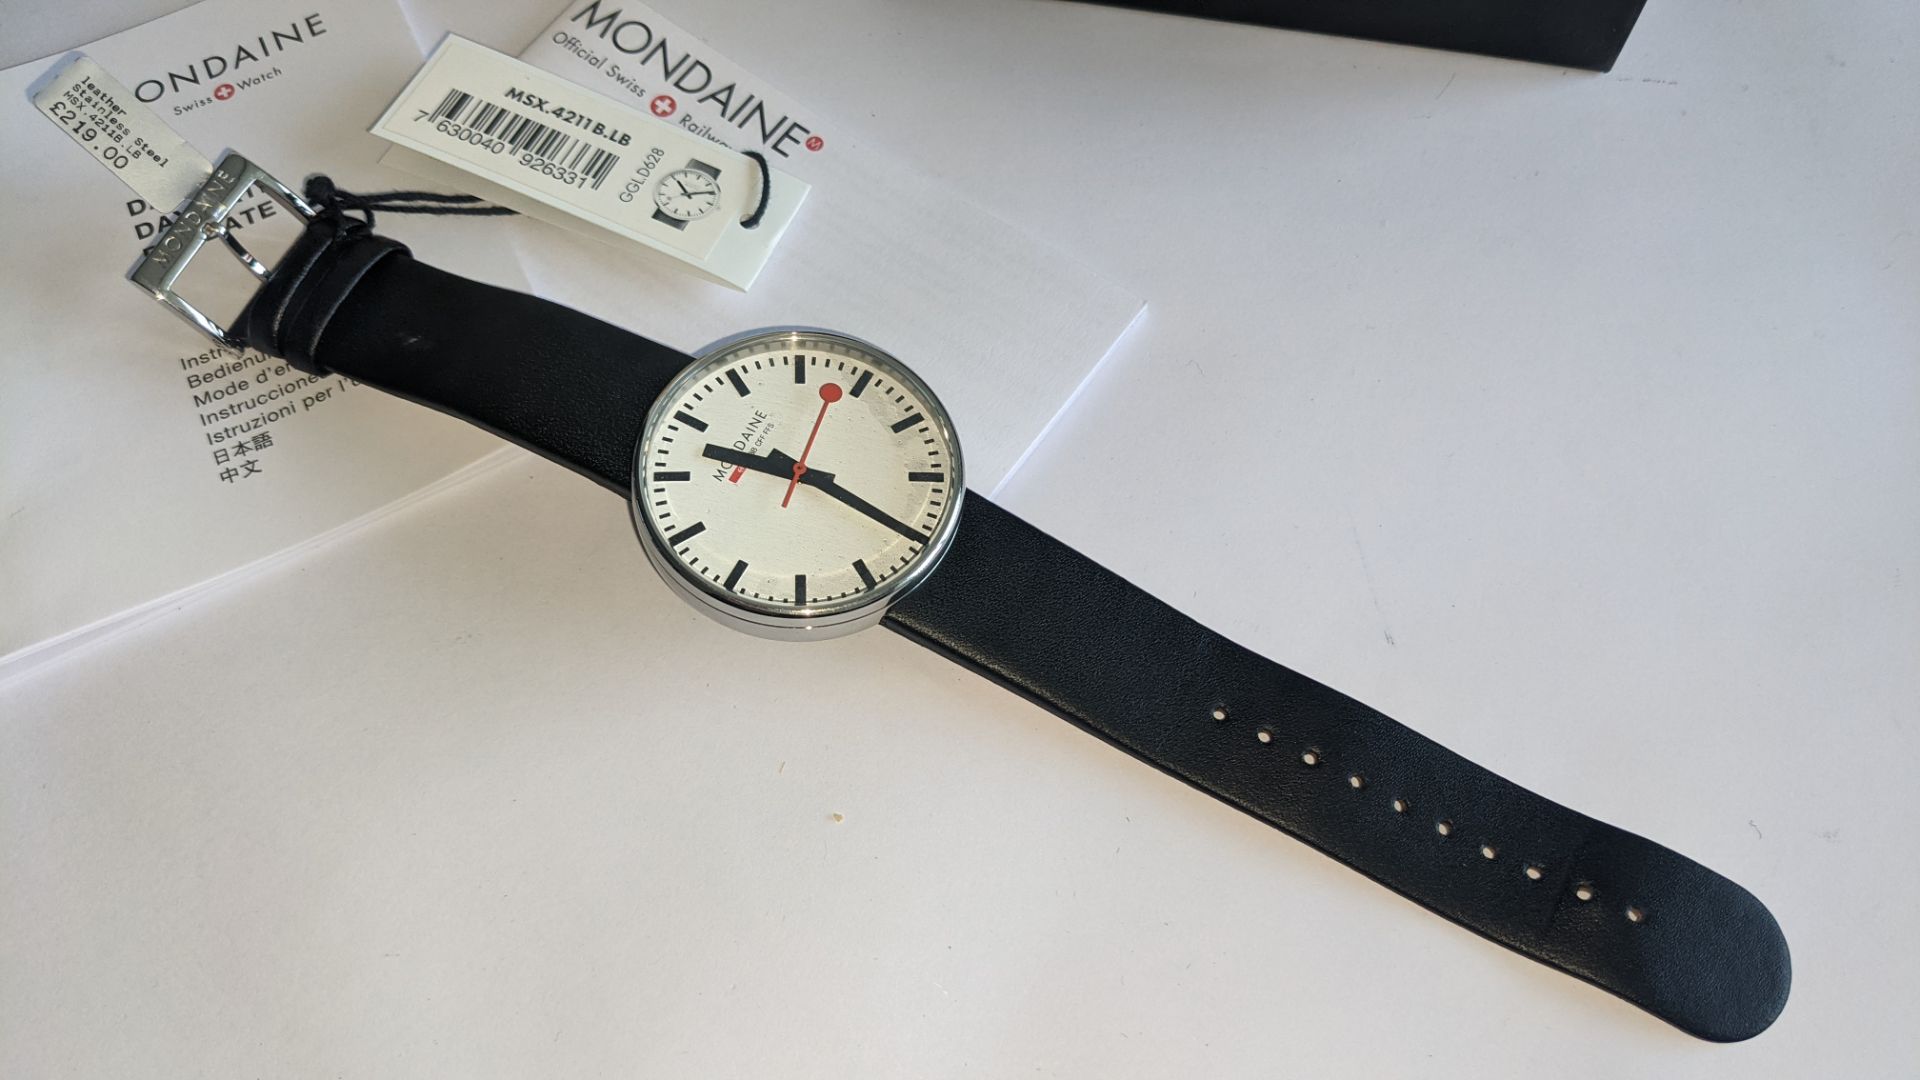 Mondaine watch, product code MSX.4211B.LB. RRP £219. Stainless steel case, water resistant. This lo - Image 4 of 17